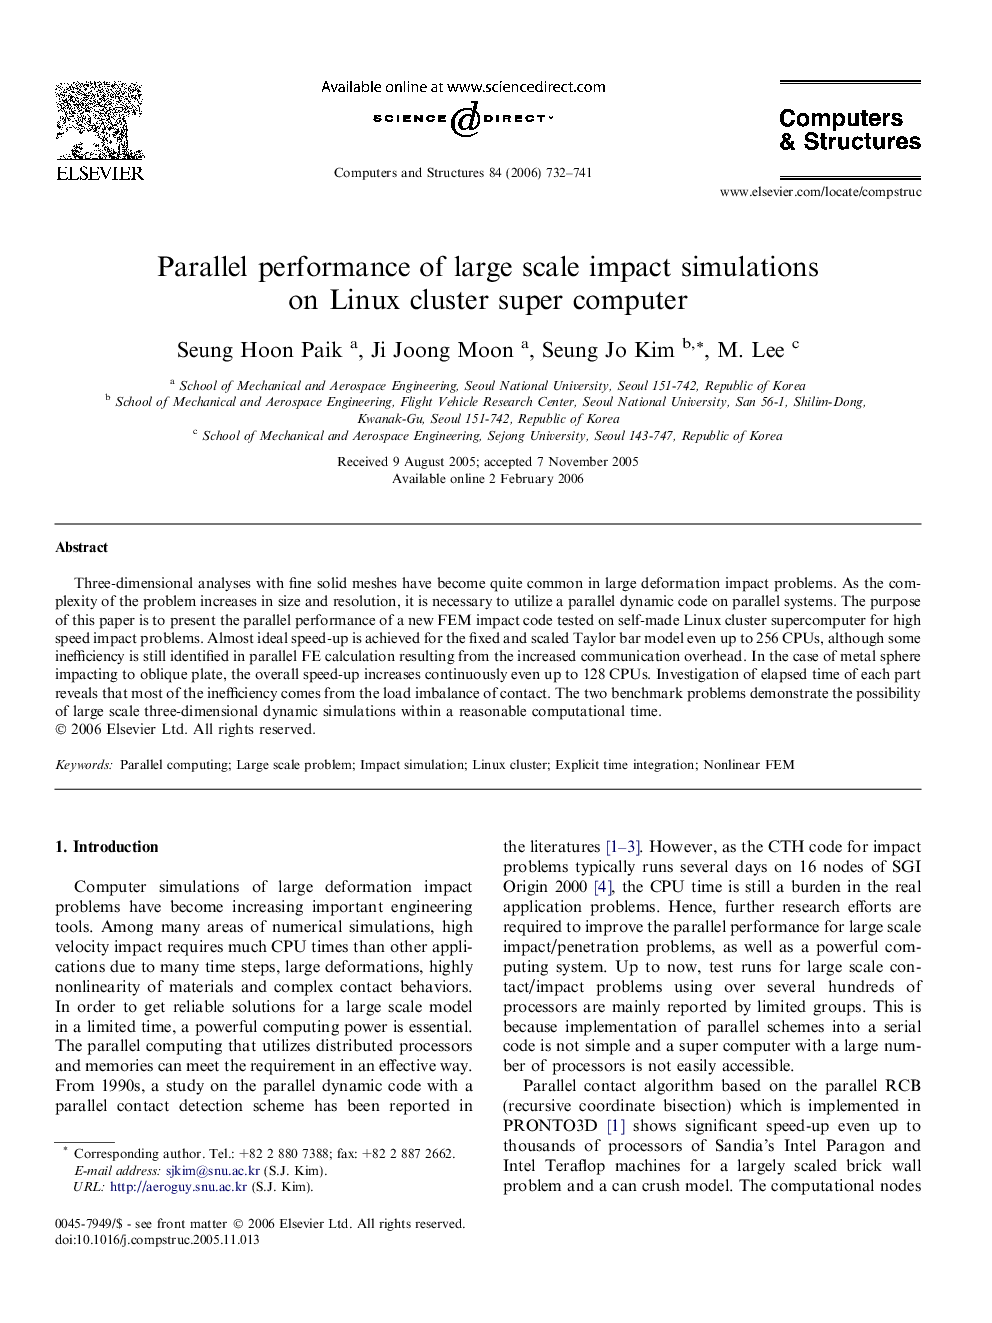 Parallel performance of large scale impact simulations on Linux cluster super computer